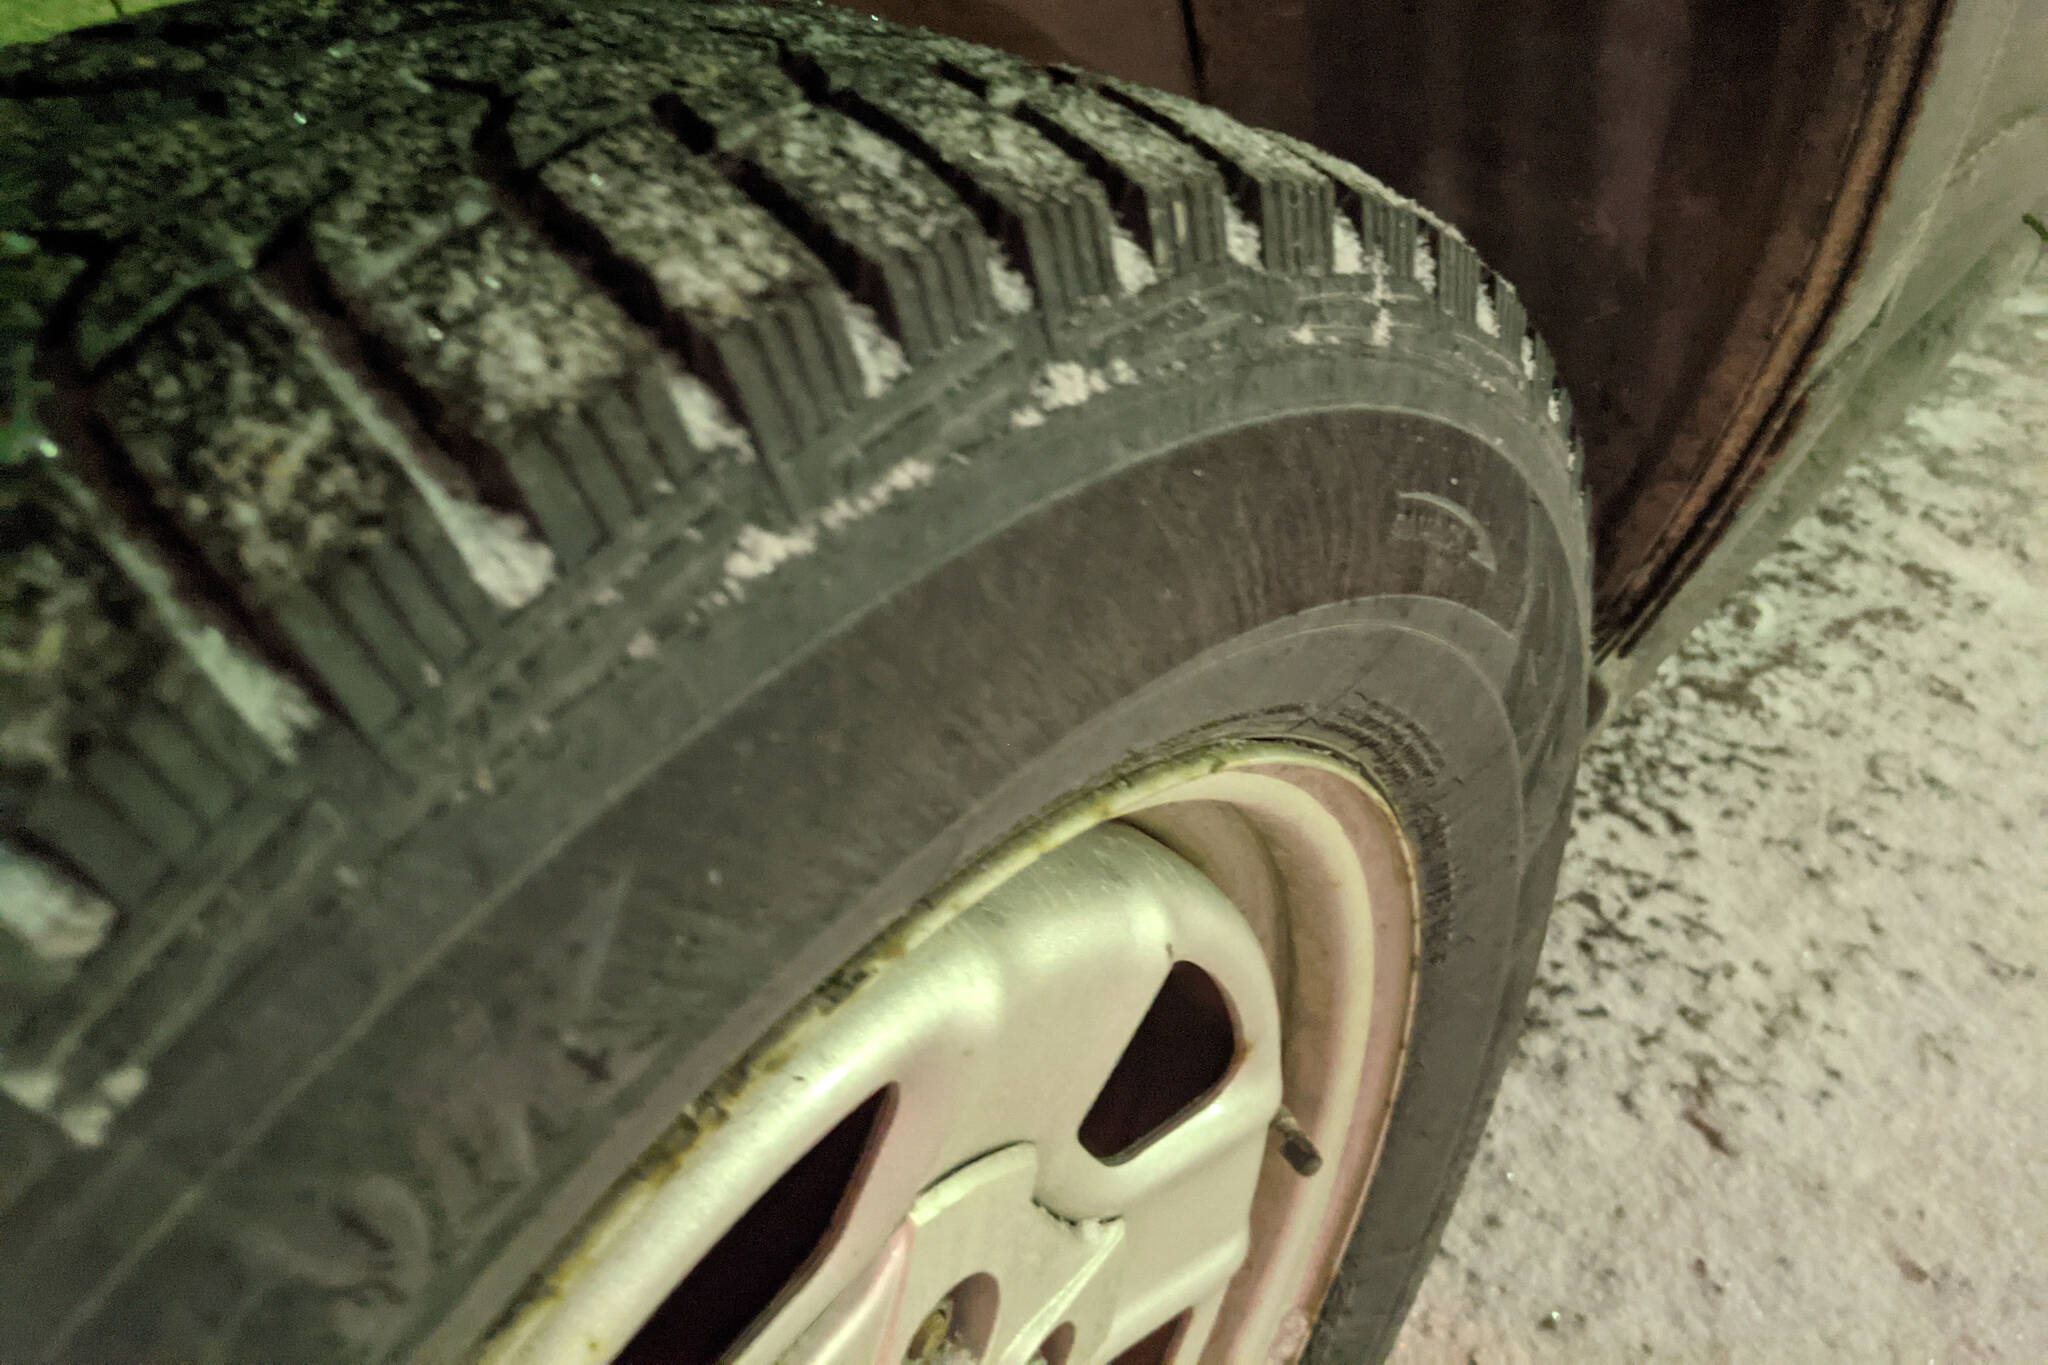 Snow falls on studded tires on Wednesday, April 7, 2021, in Kenai, Alaska. For Alaskans living above the 60 North Latitude line, which includes all portions of the Sterling Highway, studded tires must be removed by May 1, 2022. (Peninsula Clarion file)